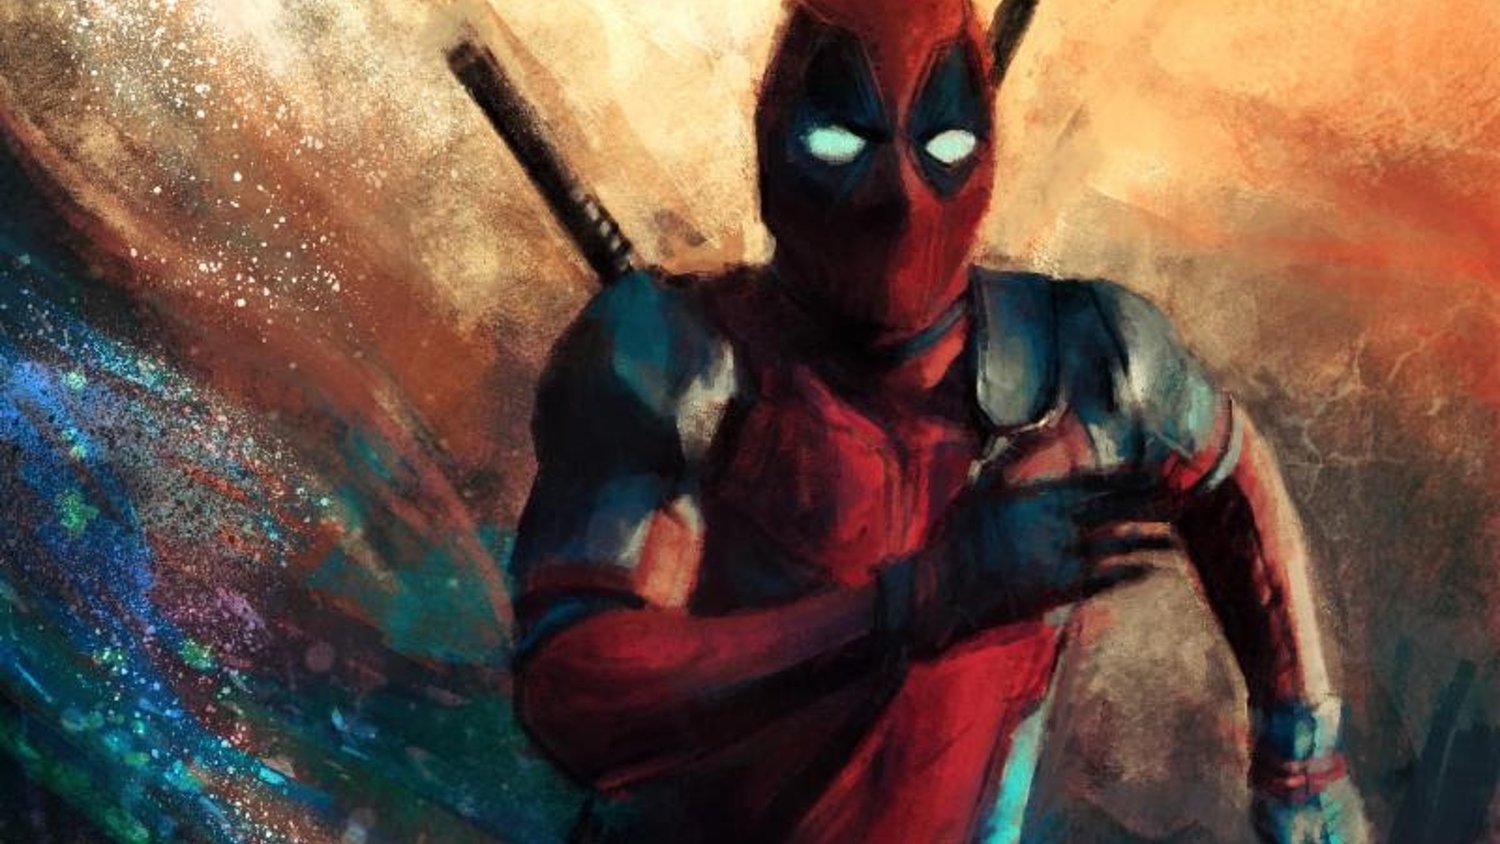 Disney Ceo Bob Iger Says Deadpool Can Stay R Rated And They